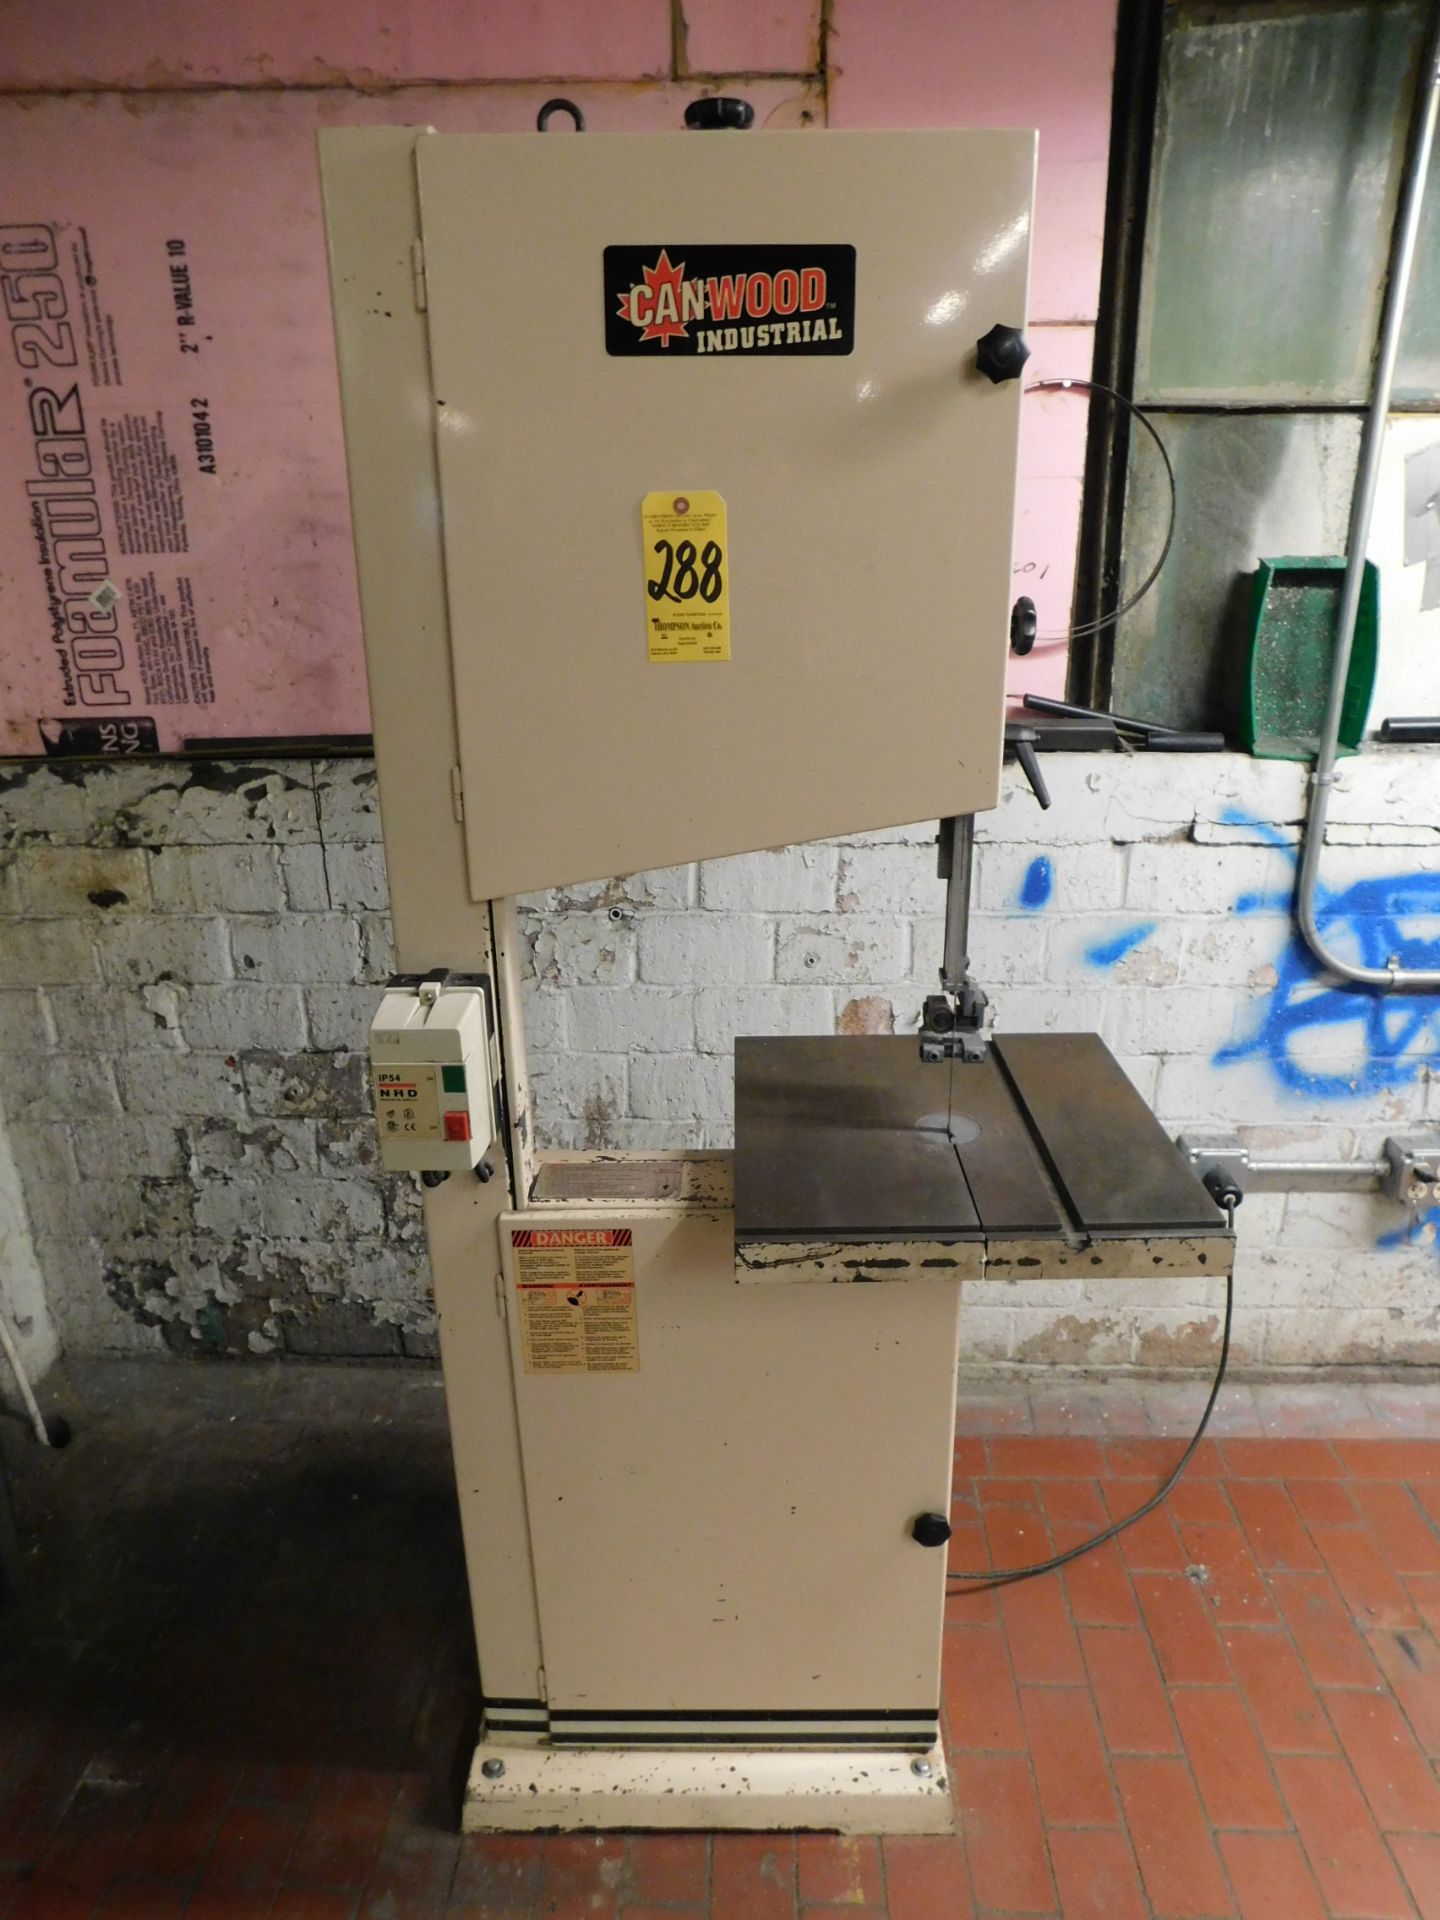 Conwood Model CWD10-450, 18 In. Vertical Band Saw, s/n 501022, 230/1/60